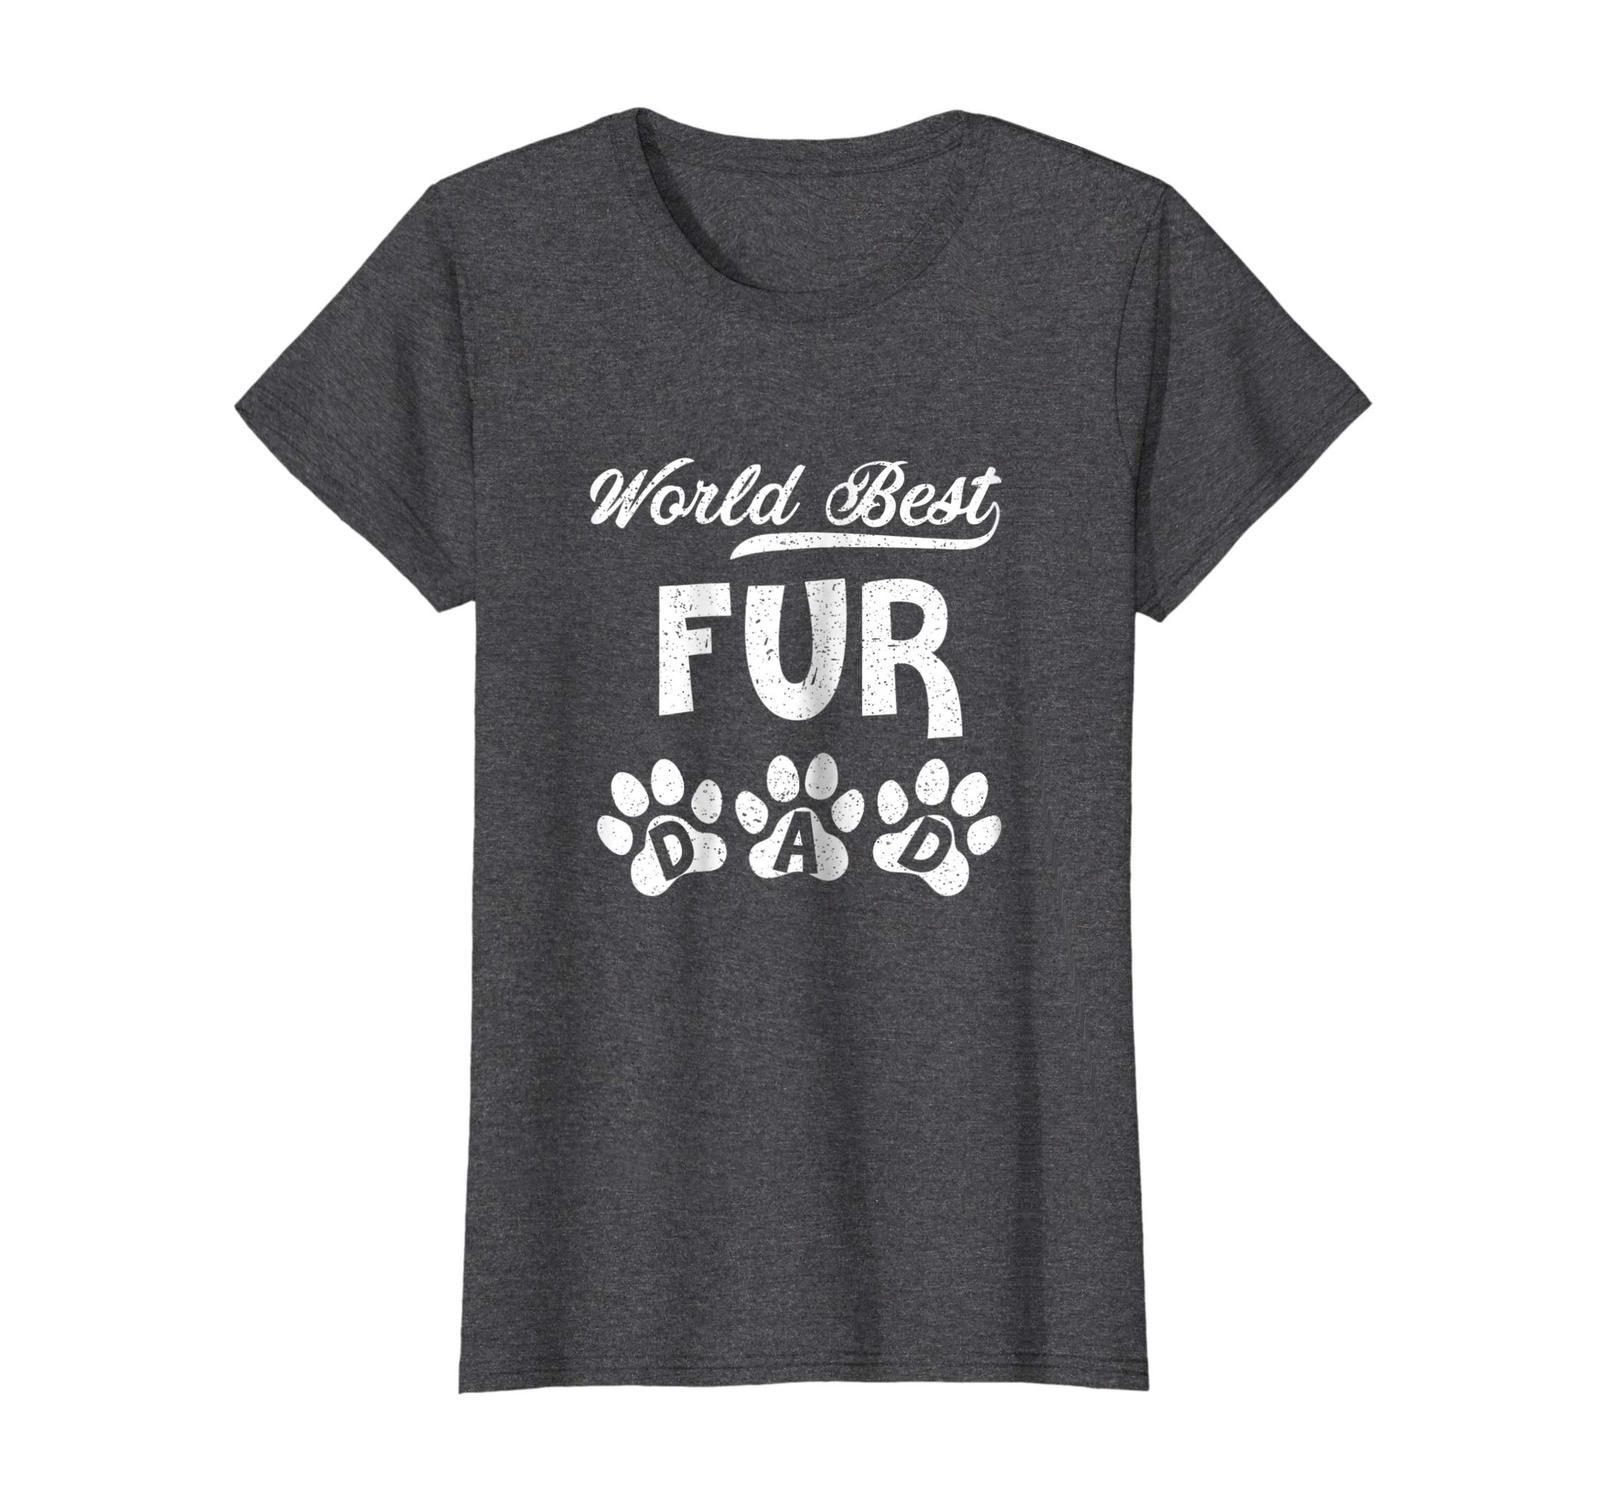 Dog Fashion - World Best Fur Dad Dogs Cats Paw Canine Feline Lover Father Wowen